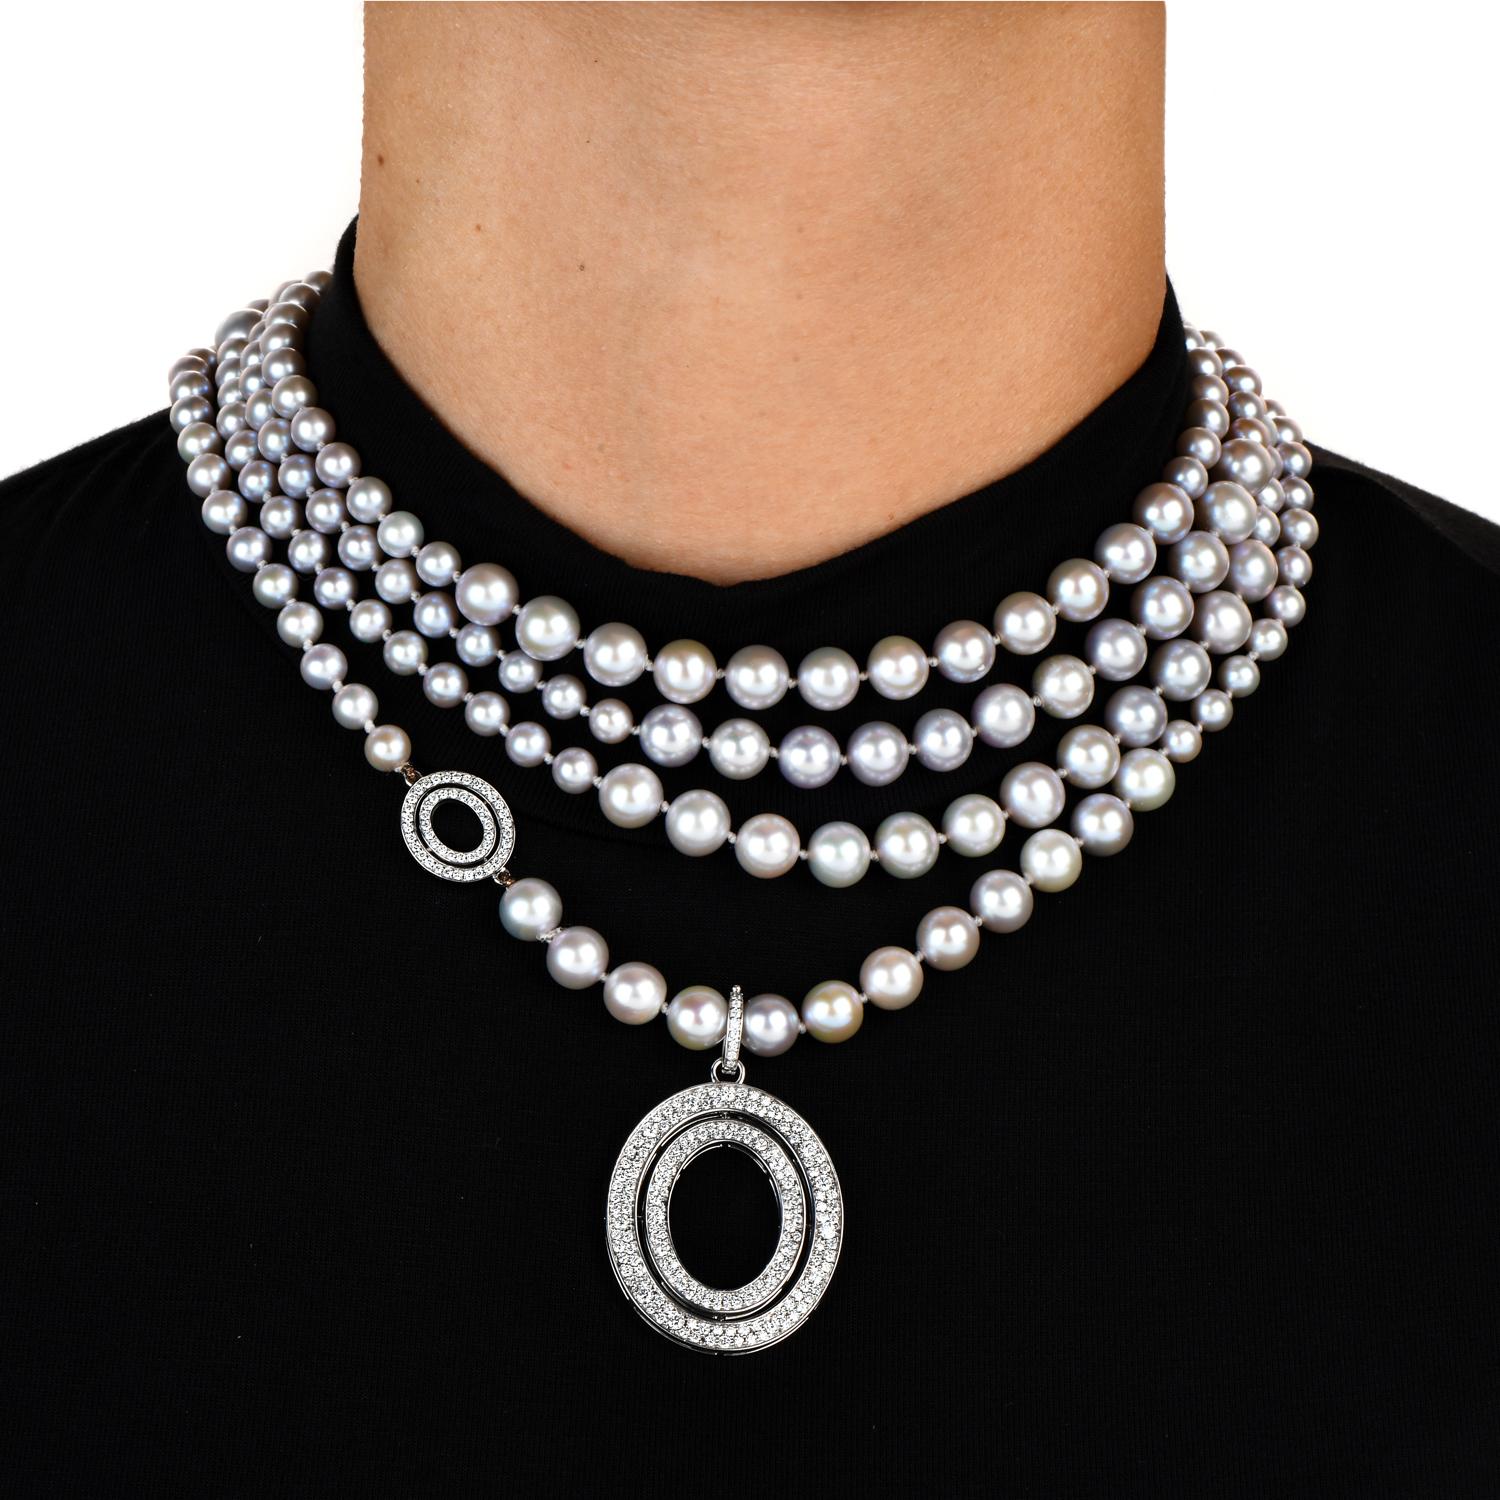 Behold the perfect mix-and-match necklace for the fun modern & elegant woman.

this versatile piece can be used for work or for fine dining out, it can be styled in many ways for a renewed look.

Is a graduated strand or genuine gray